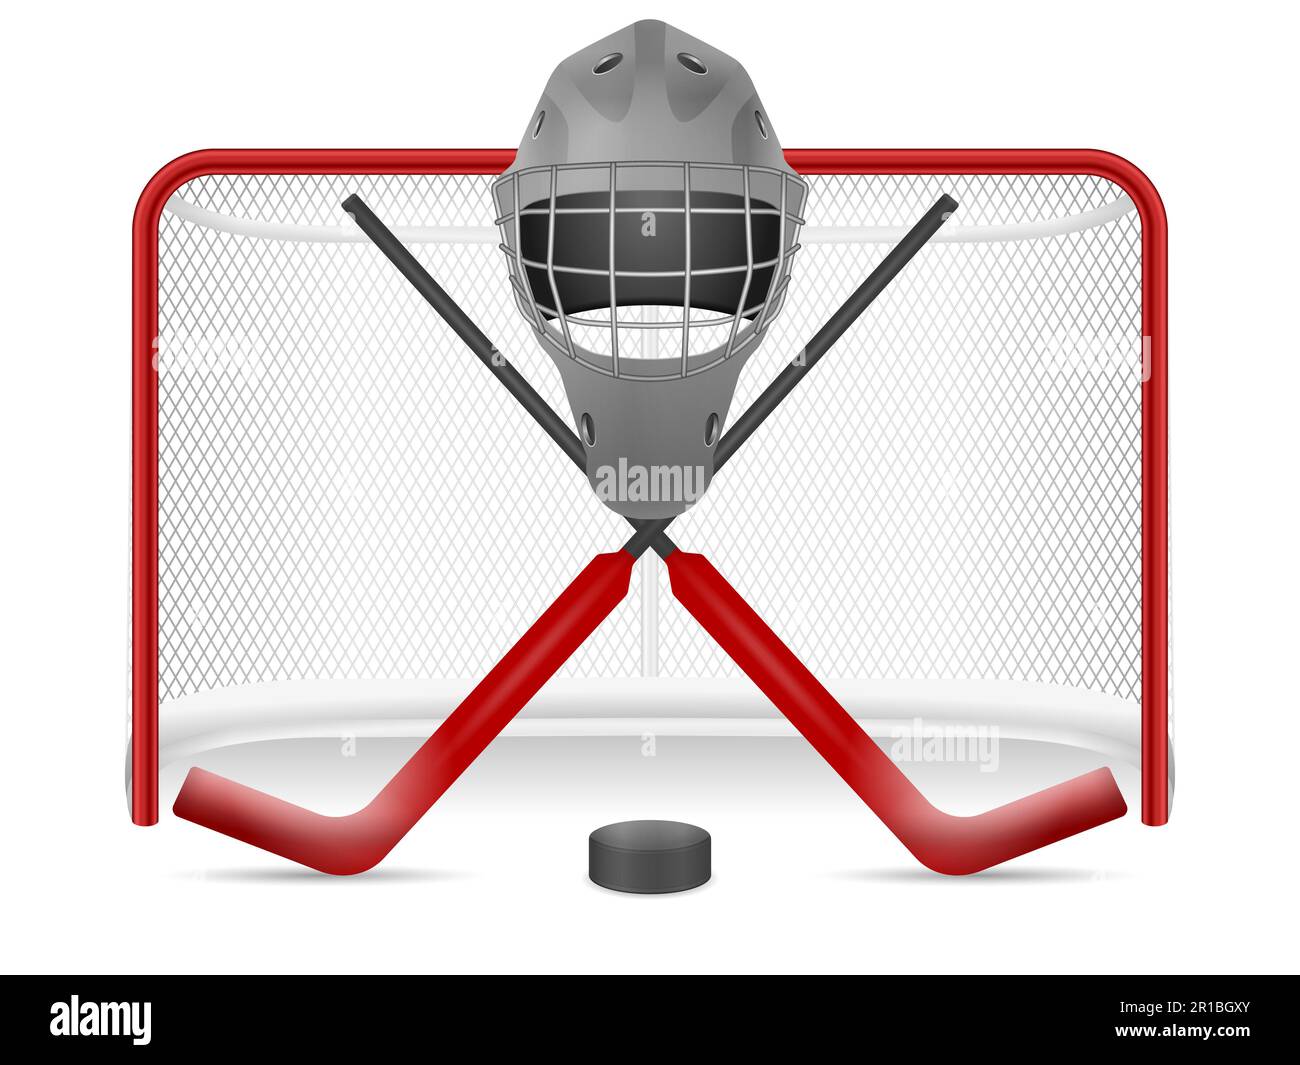 Hockey goal with a stick and a puck, color vector illustration in